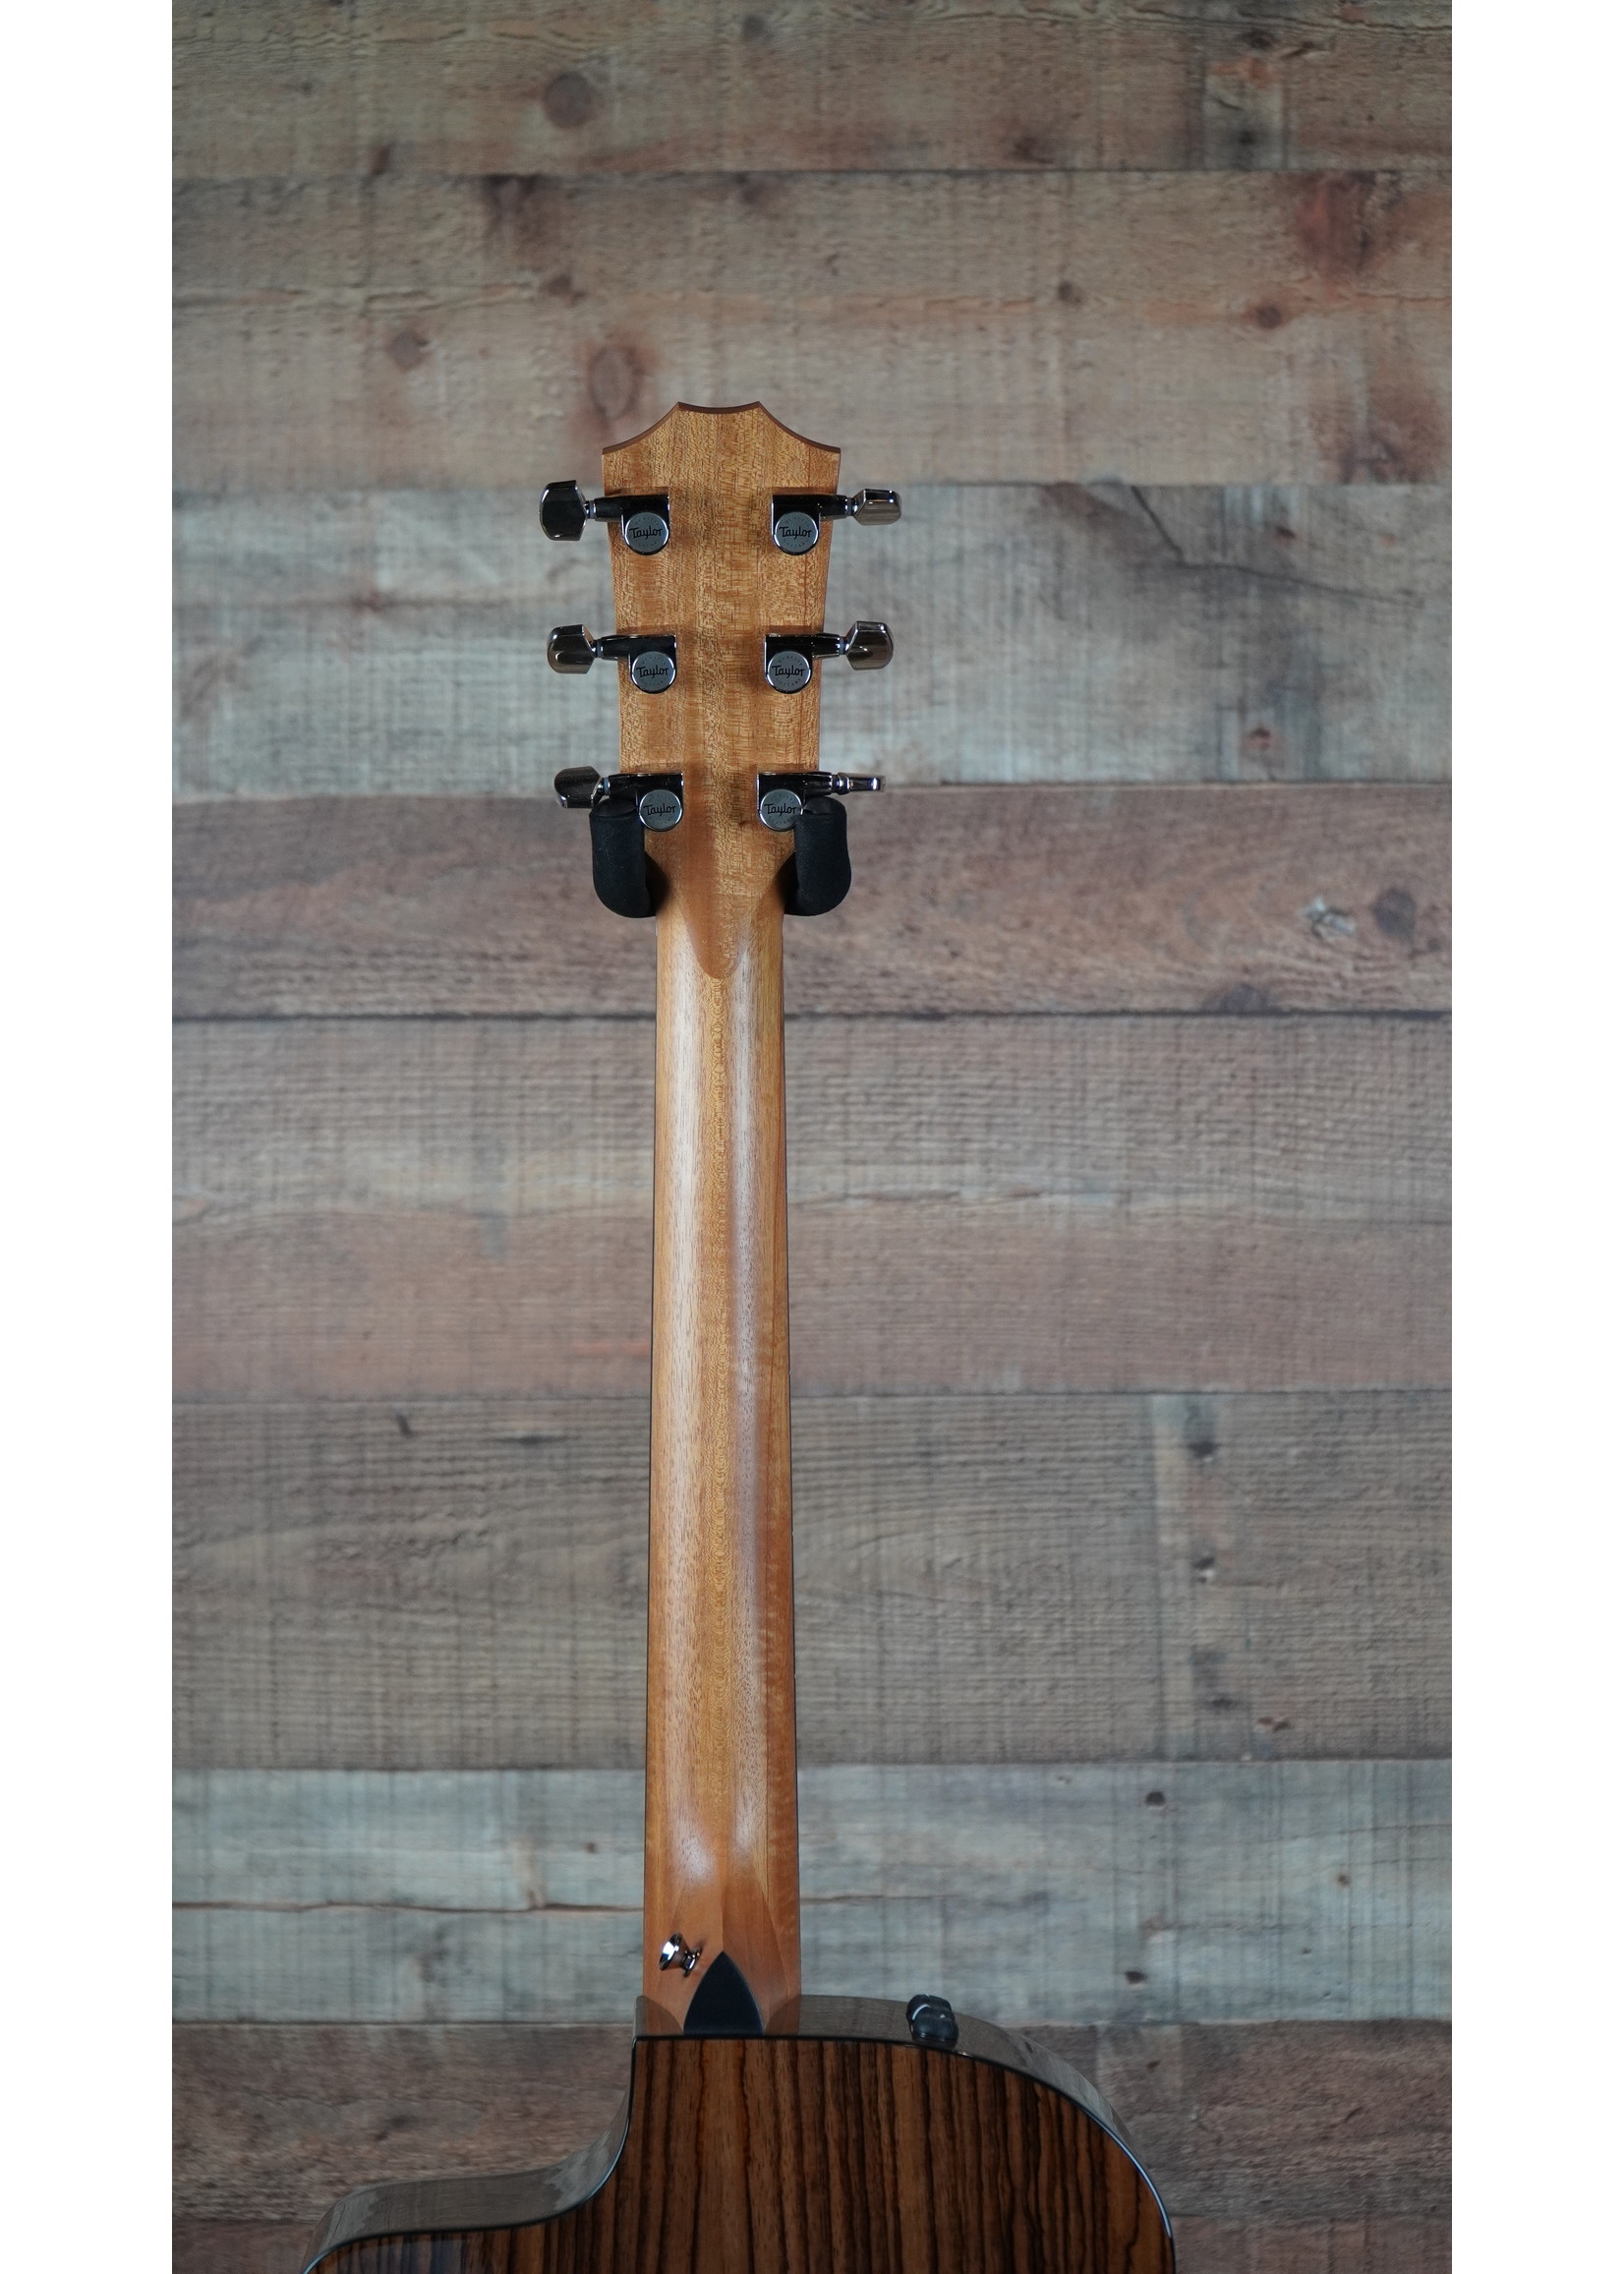 Taylor 214ce Plus 6-String | Sitka Spruce Top | Layered Rosewood Back and Sides | Tropical Mahogany Neck | West African Crelicam Ebony Fretboard | Expression System® 2 Electronics | Venetian Cutaway | Aerocase